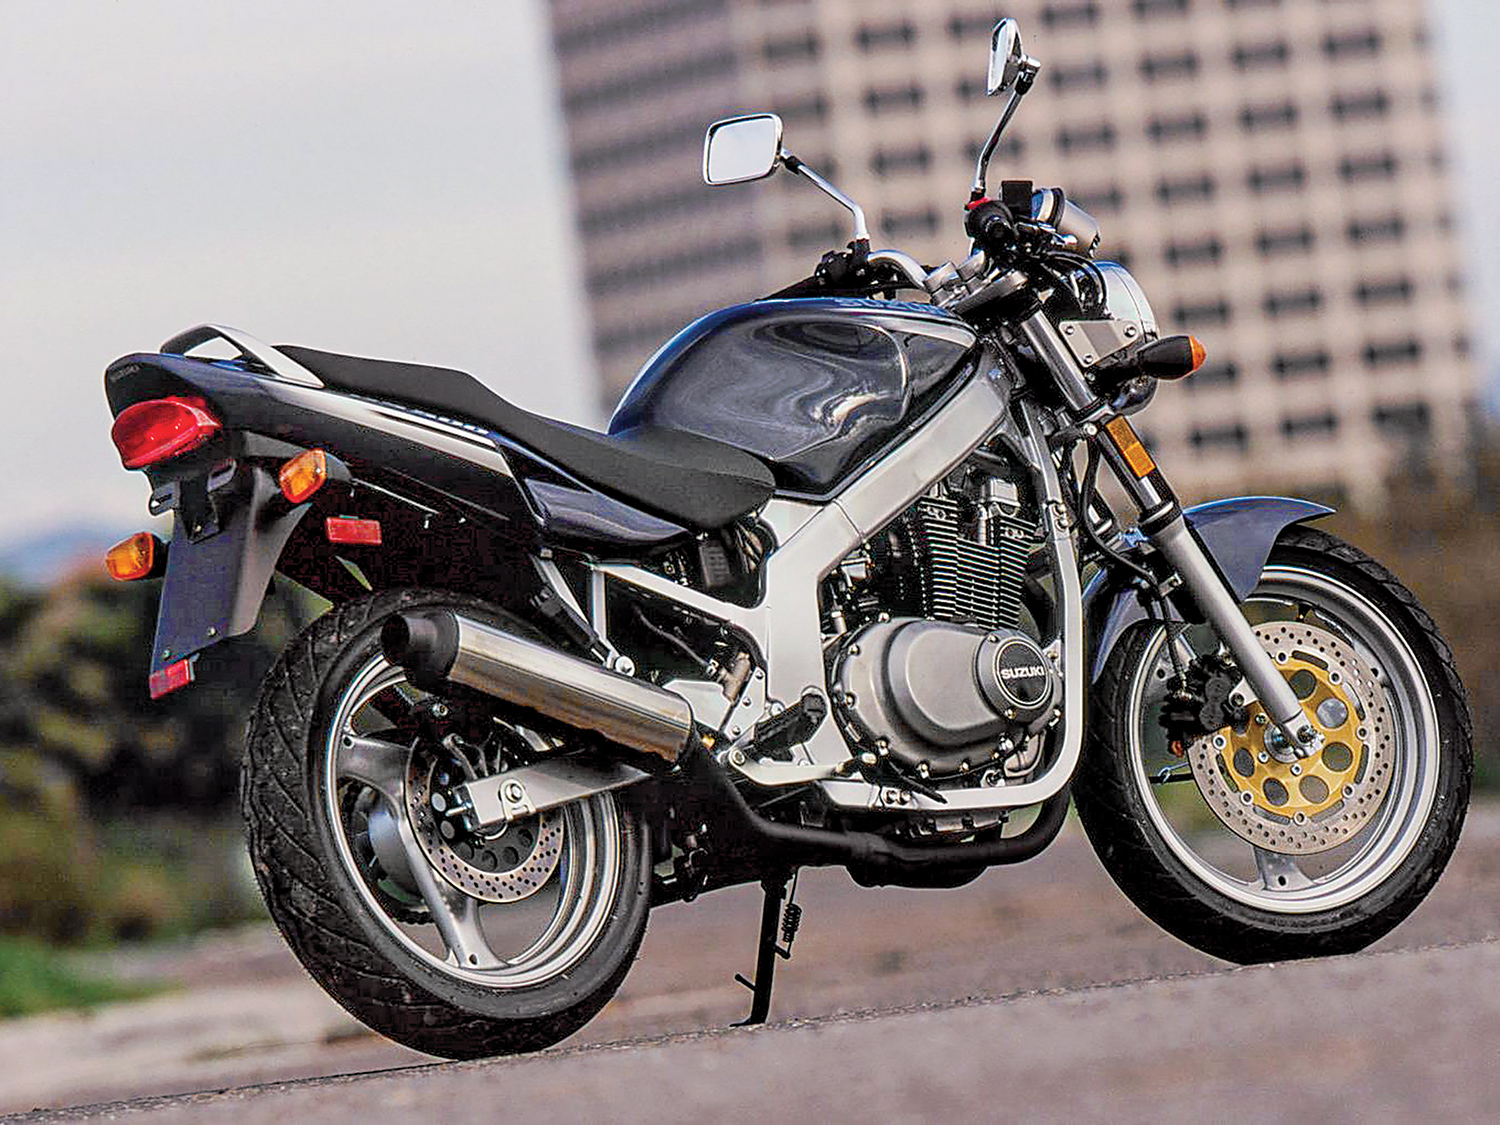 Is The Suzuki GS500 A Good Motorcycle? 